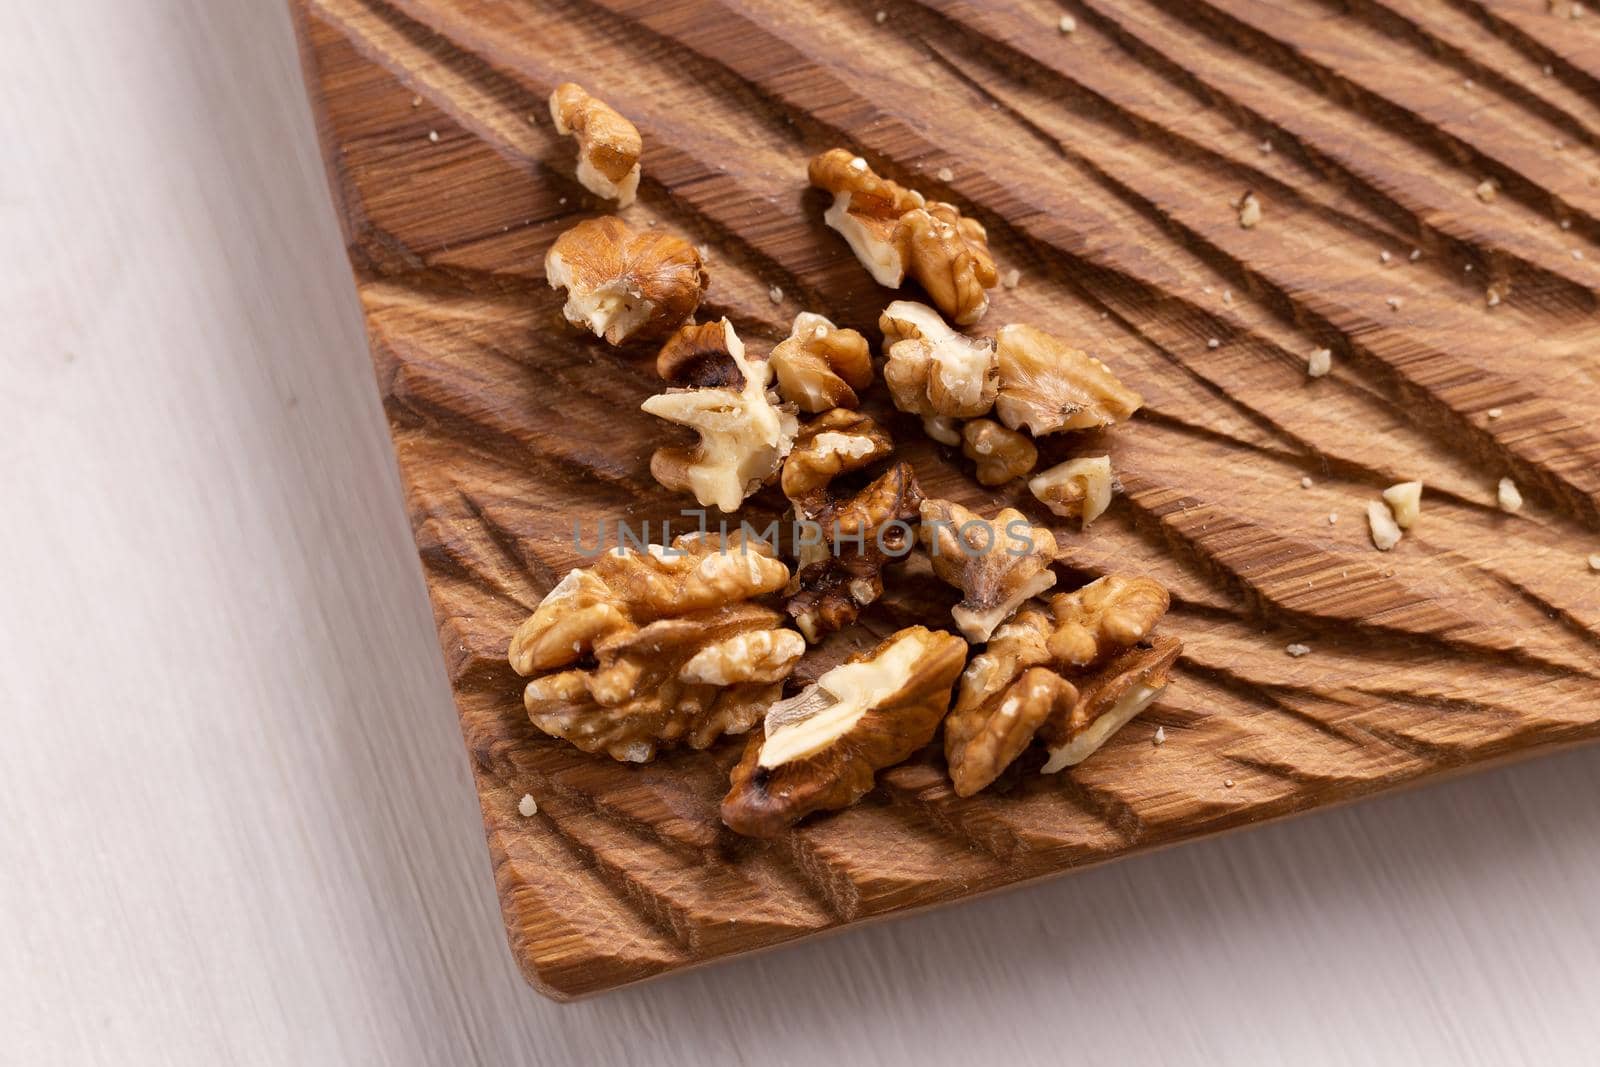 Walnut kernels on rustic board. Concept of healthy food and vegetarianism by Satura86